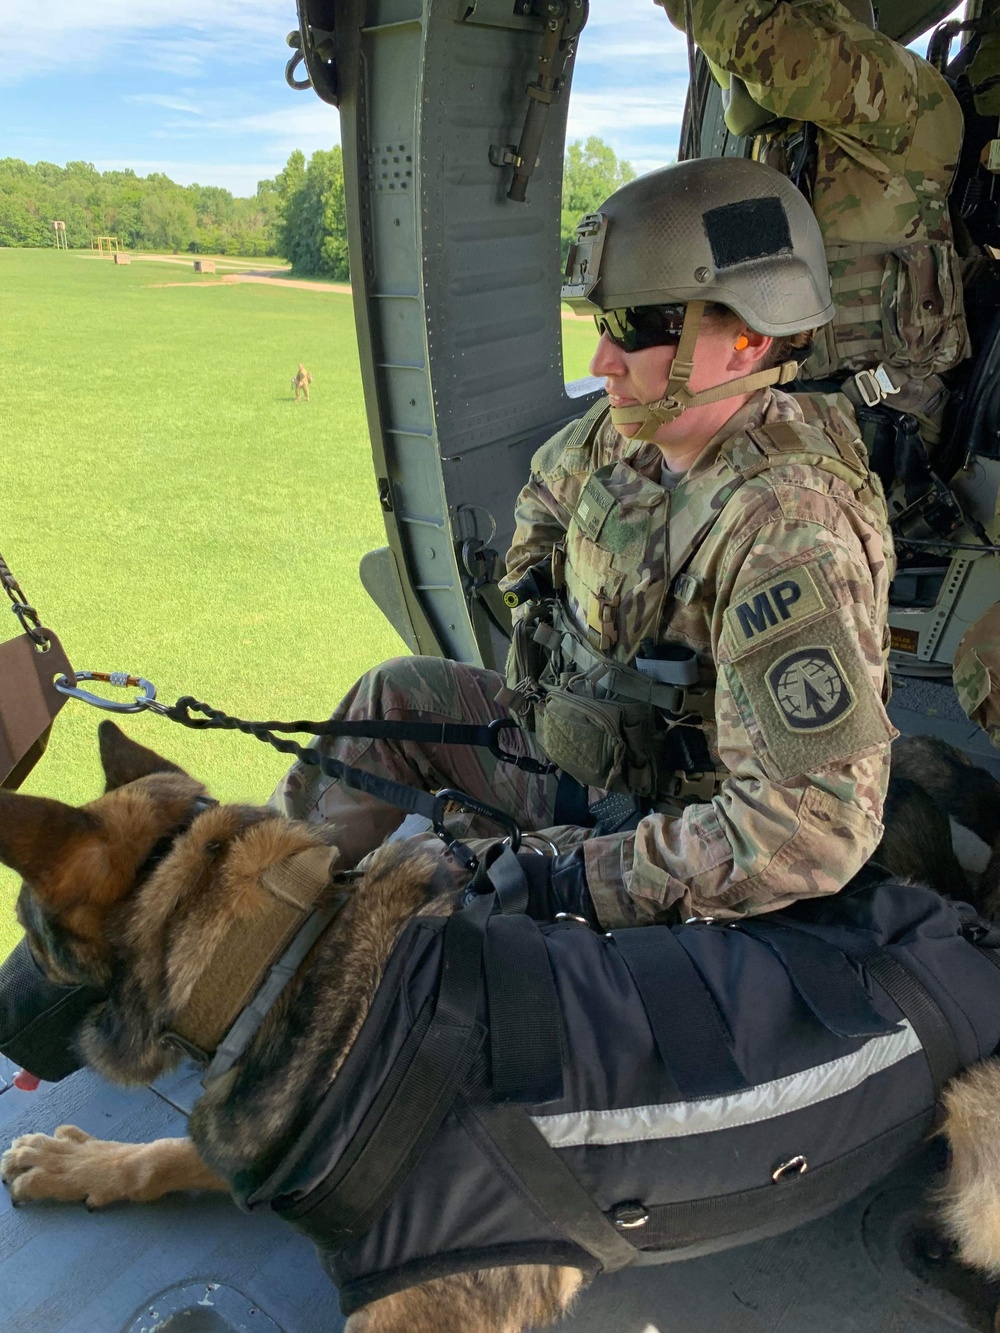 “The Dogs of War” – 510th Military Police Detachment Continues to Support Operations Overseas